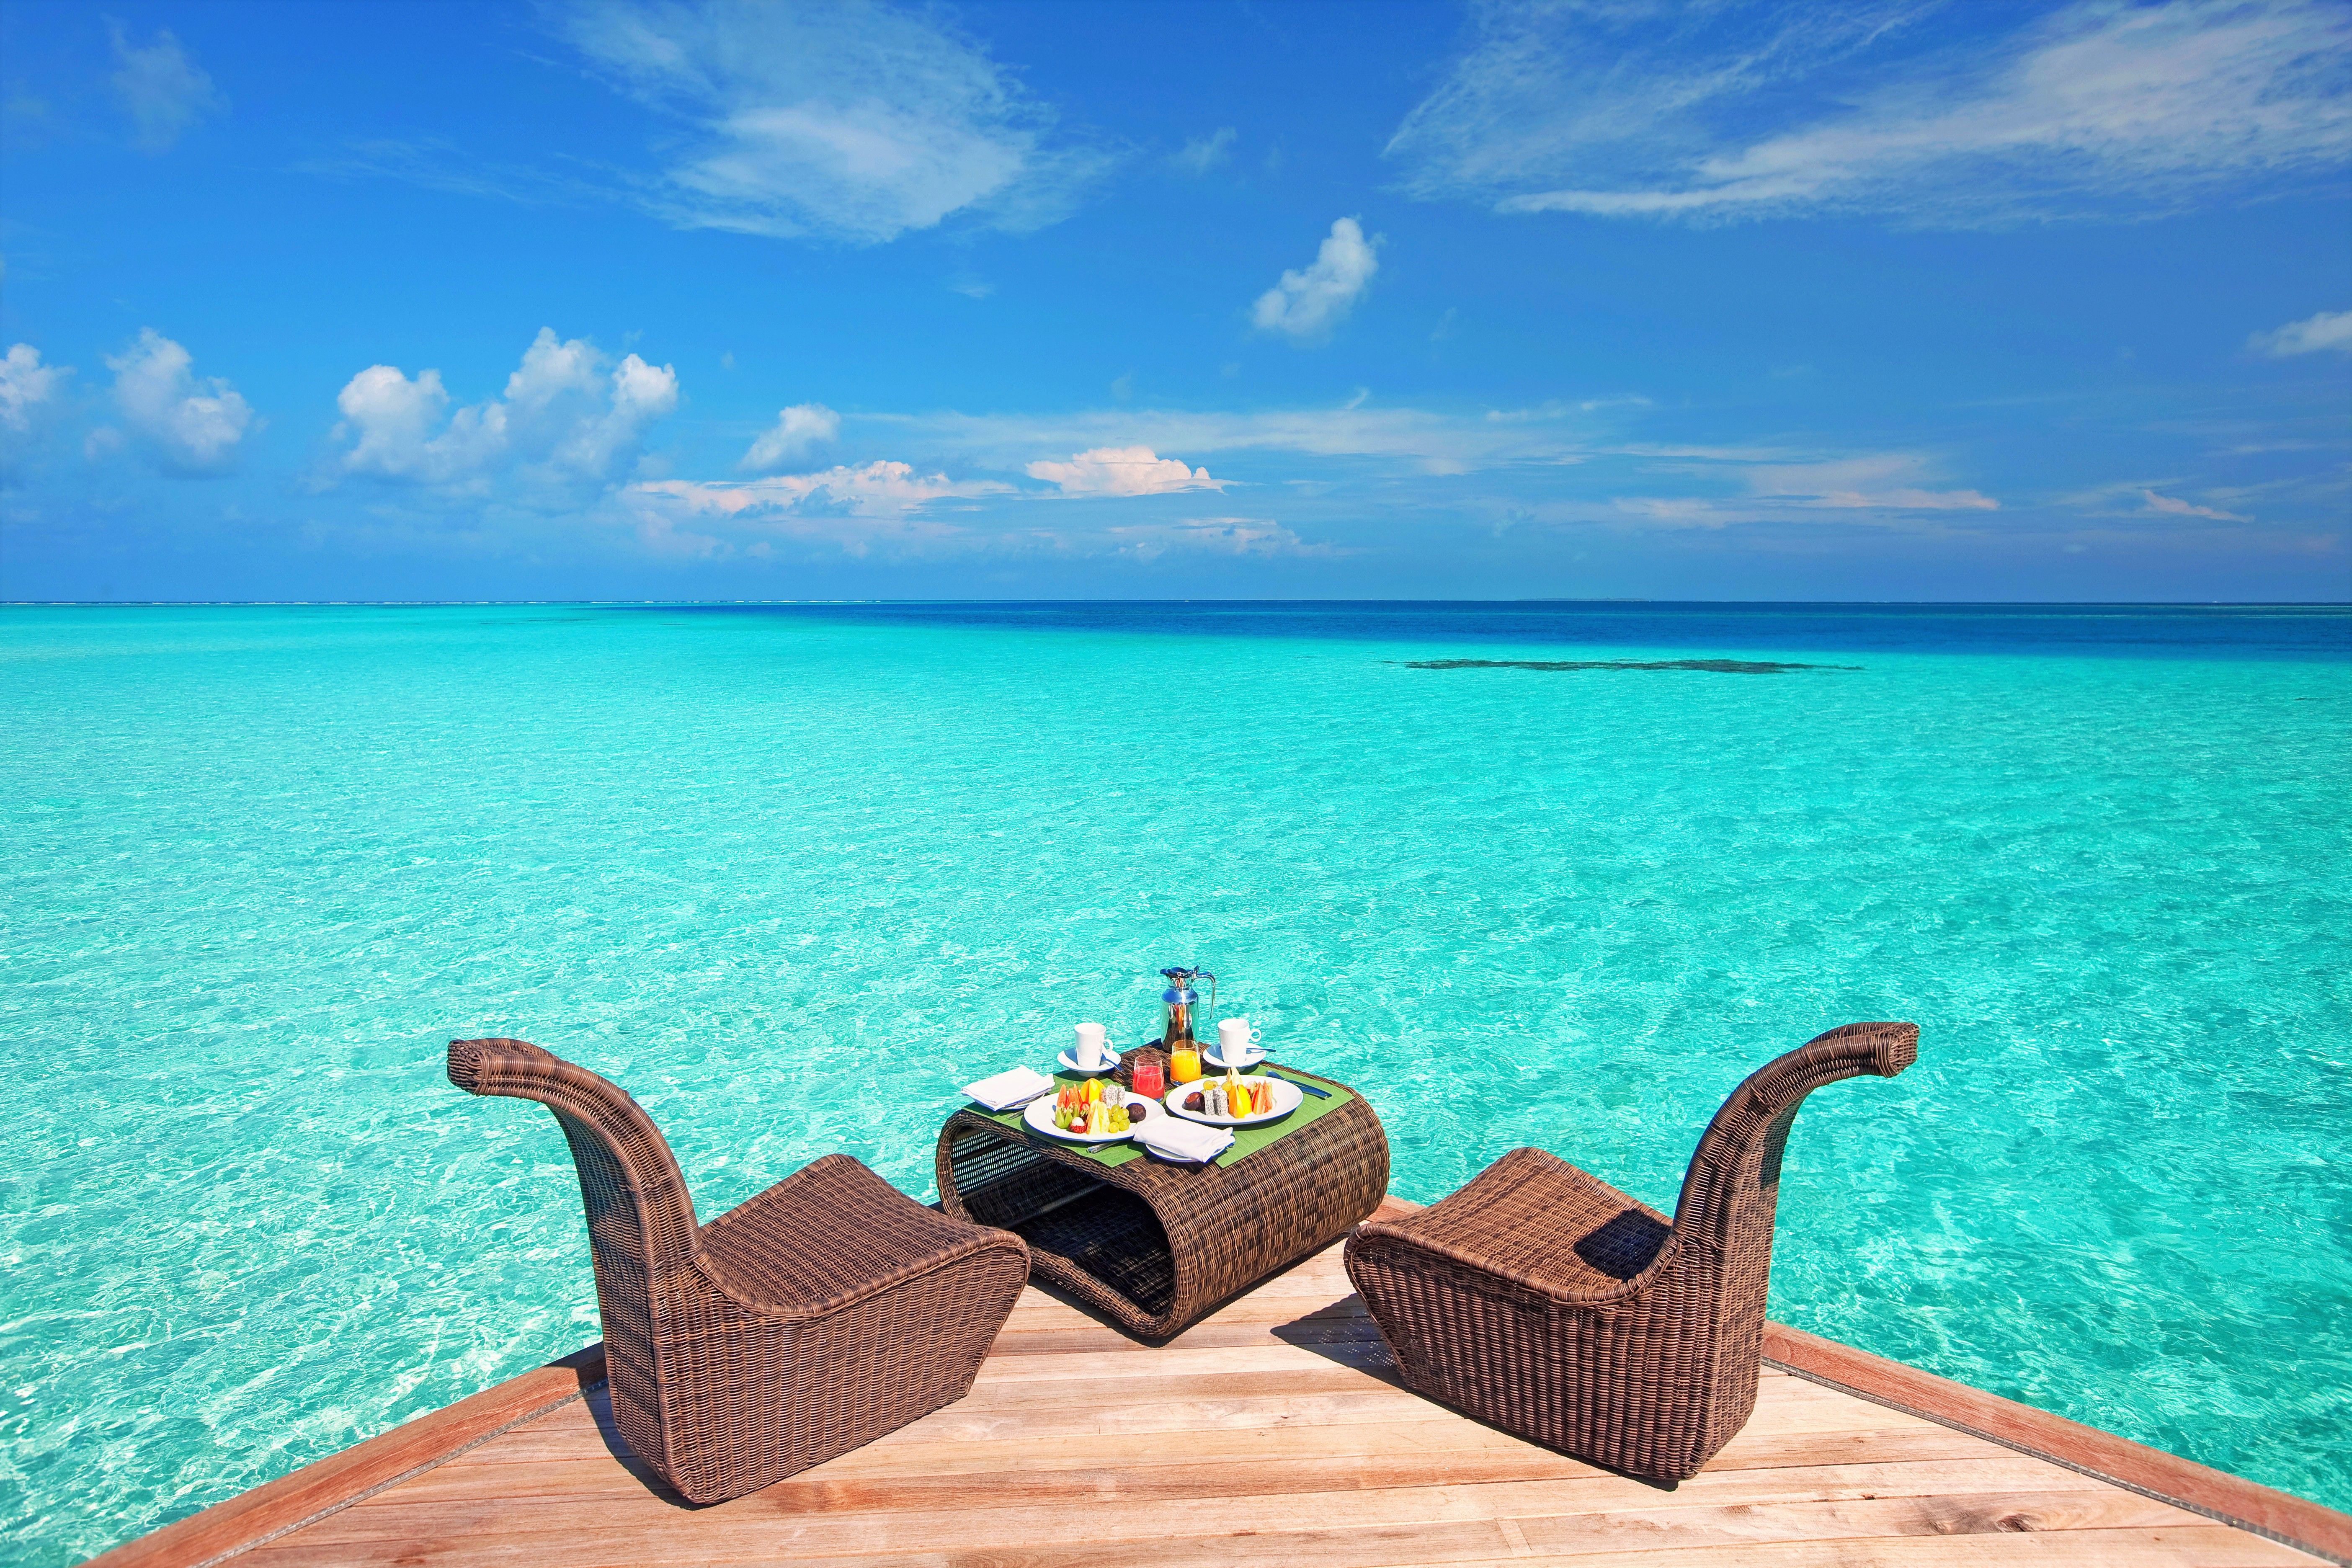 Lunch with View of Tropical Sea 5k Retina Ultra HD Wallpaper